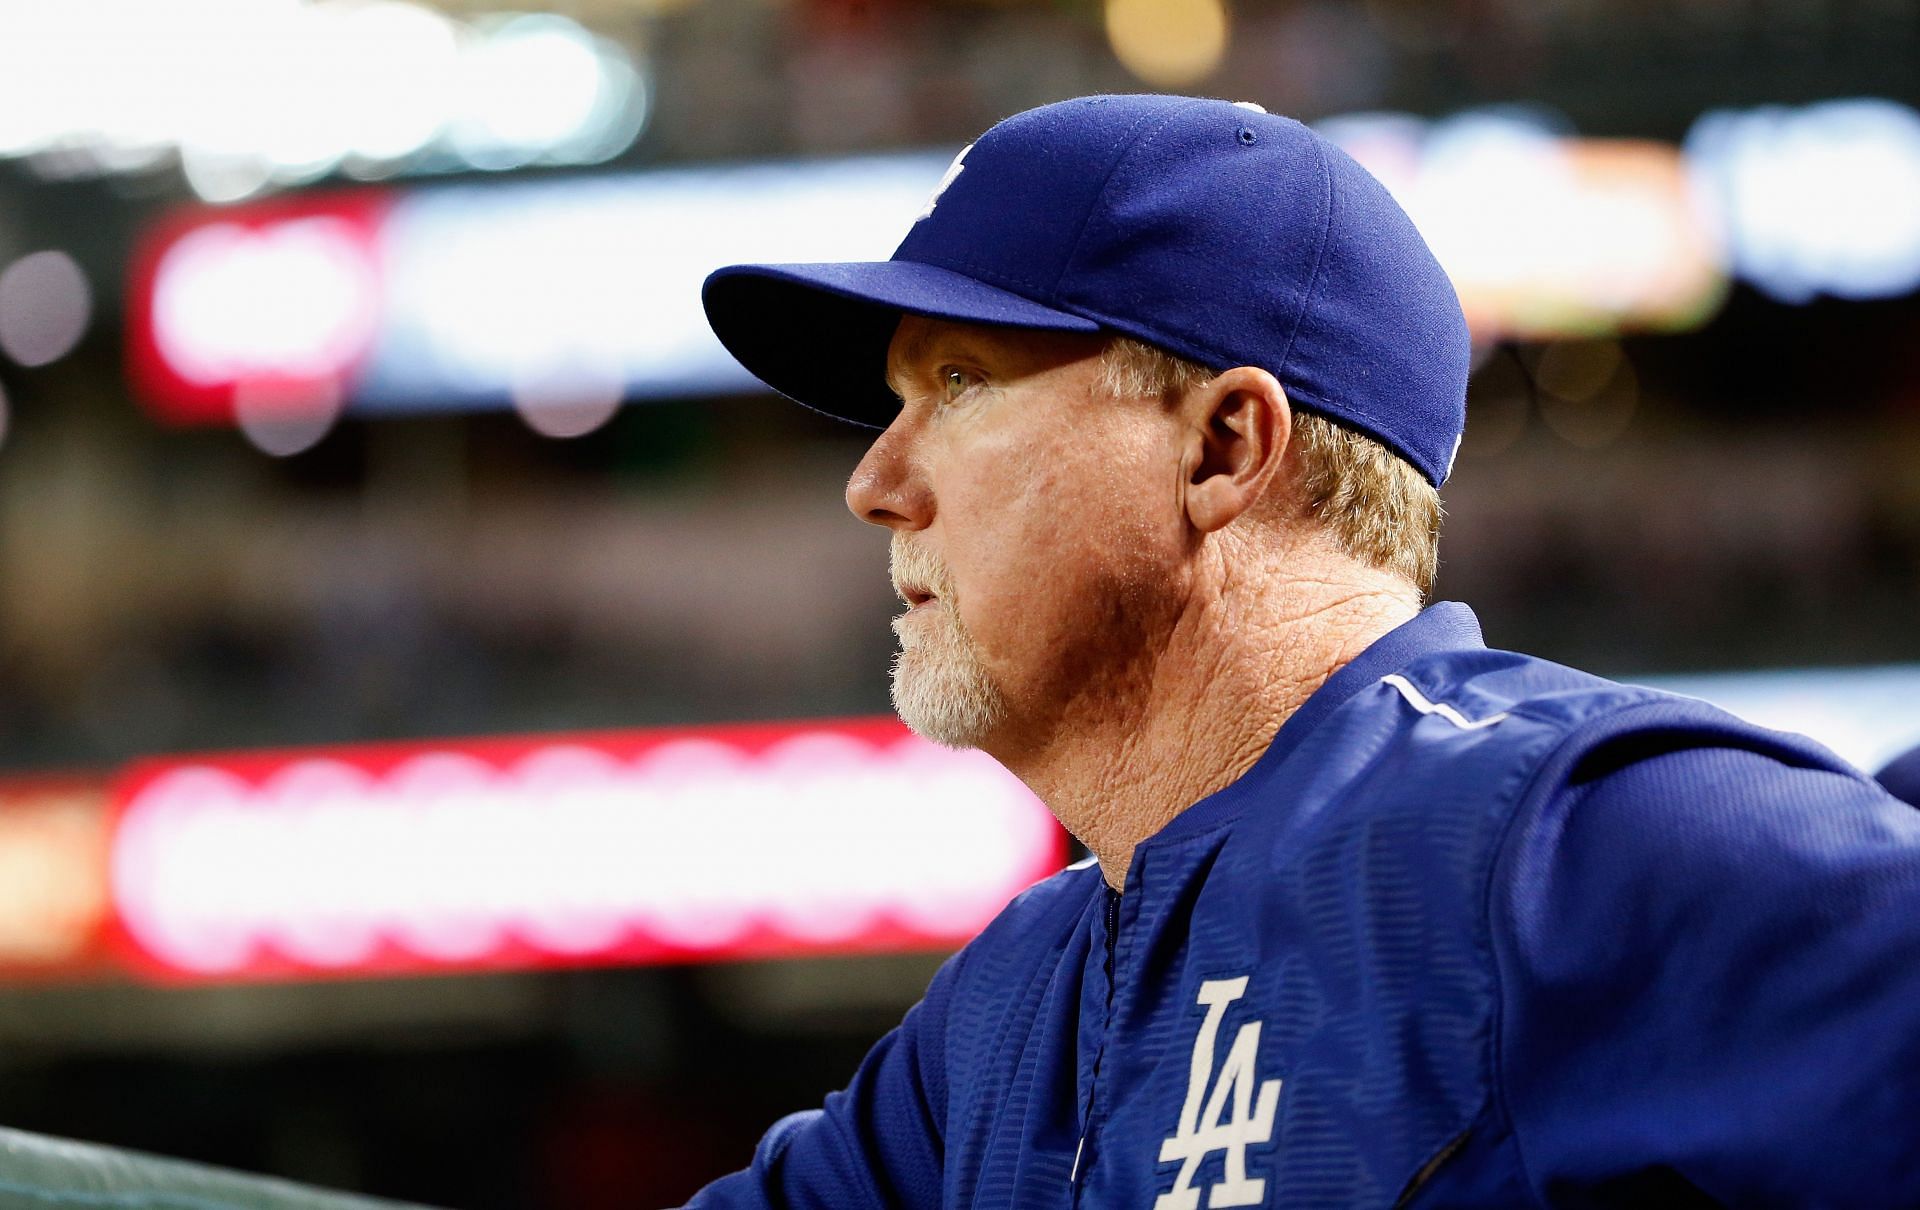 McGwire, coaching the Los Angeles Dodgers in a game against the Arizona Diamondbacks